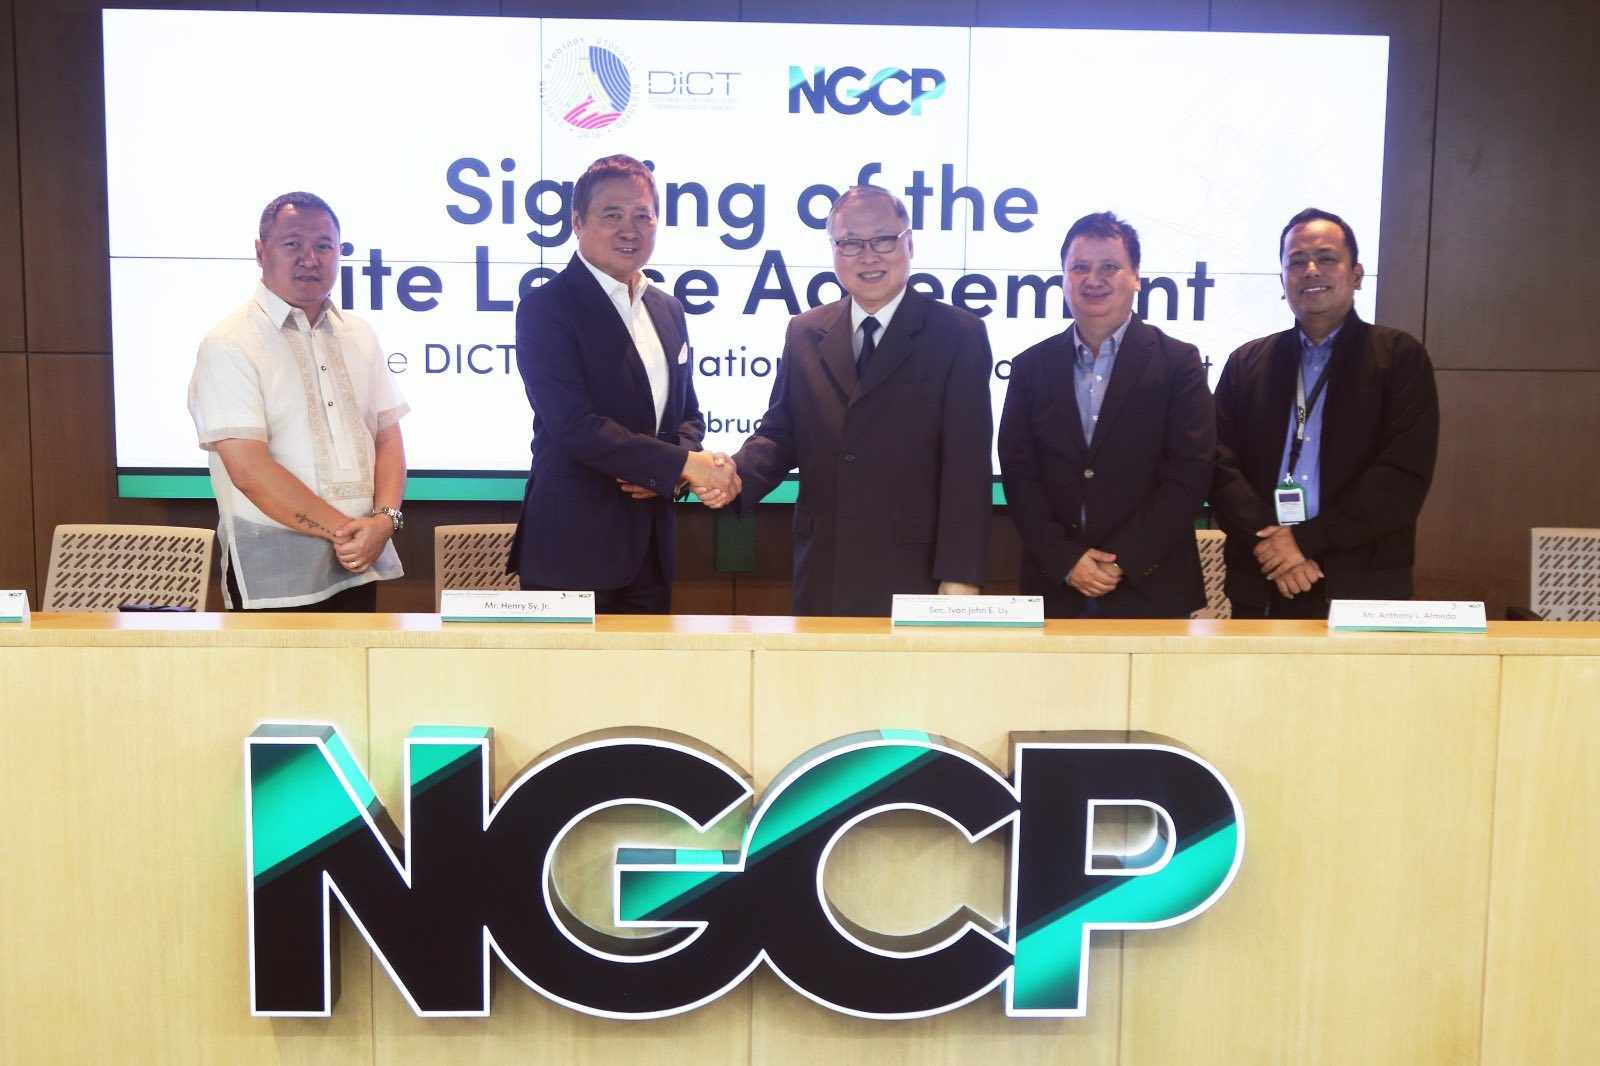 NGCP, DICT ink lease agreement for national fiber backbone